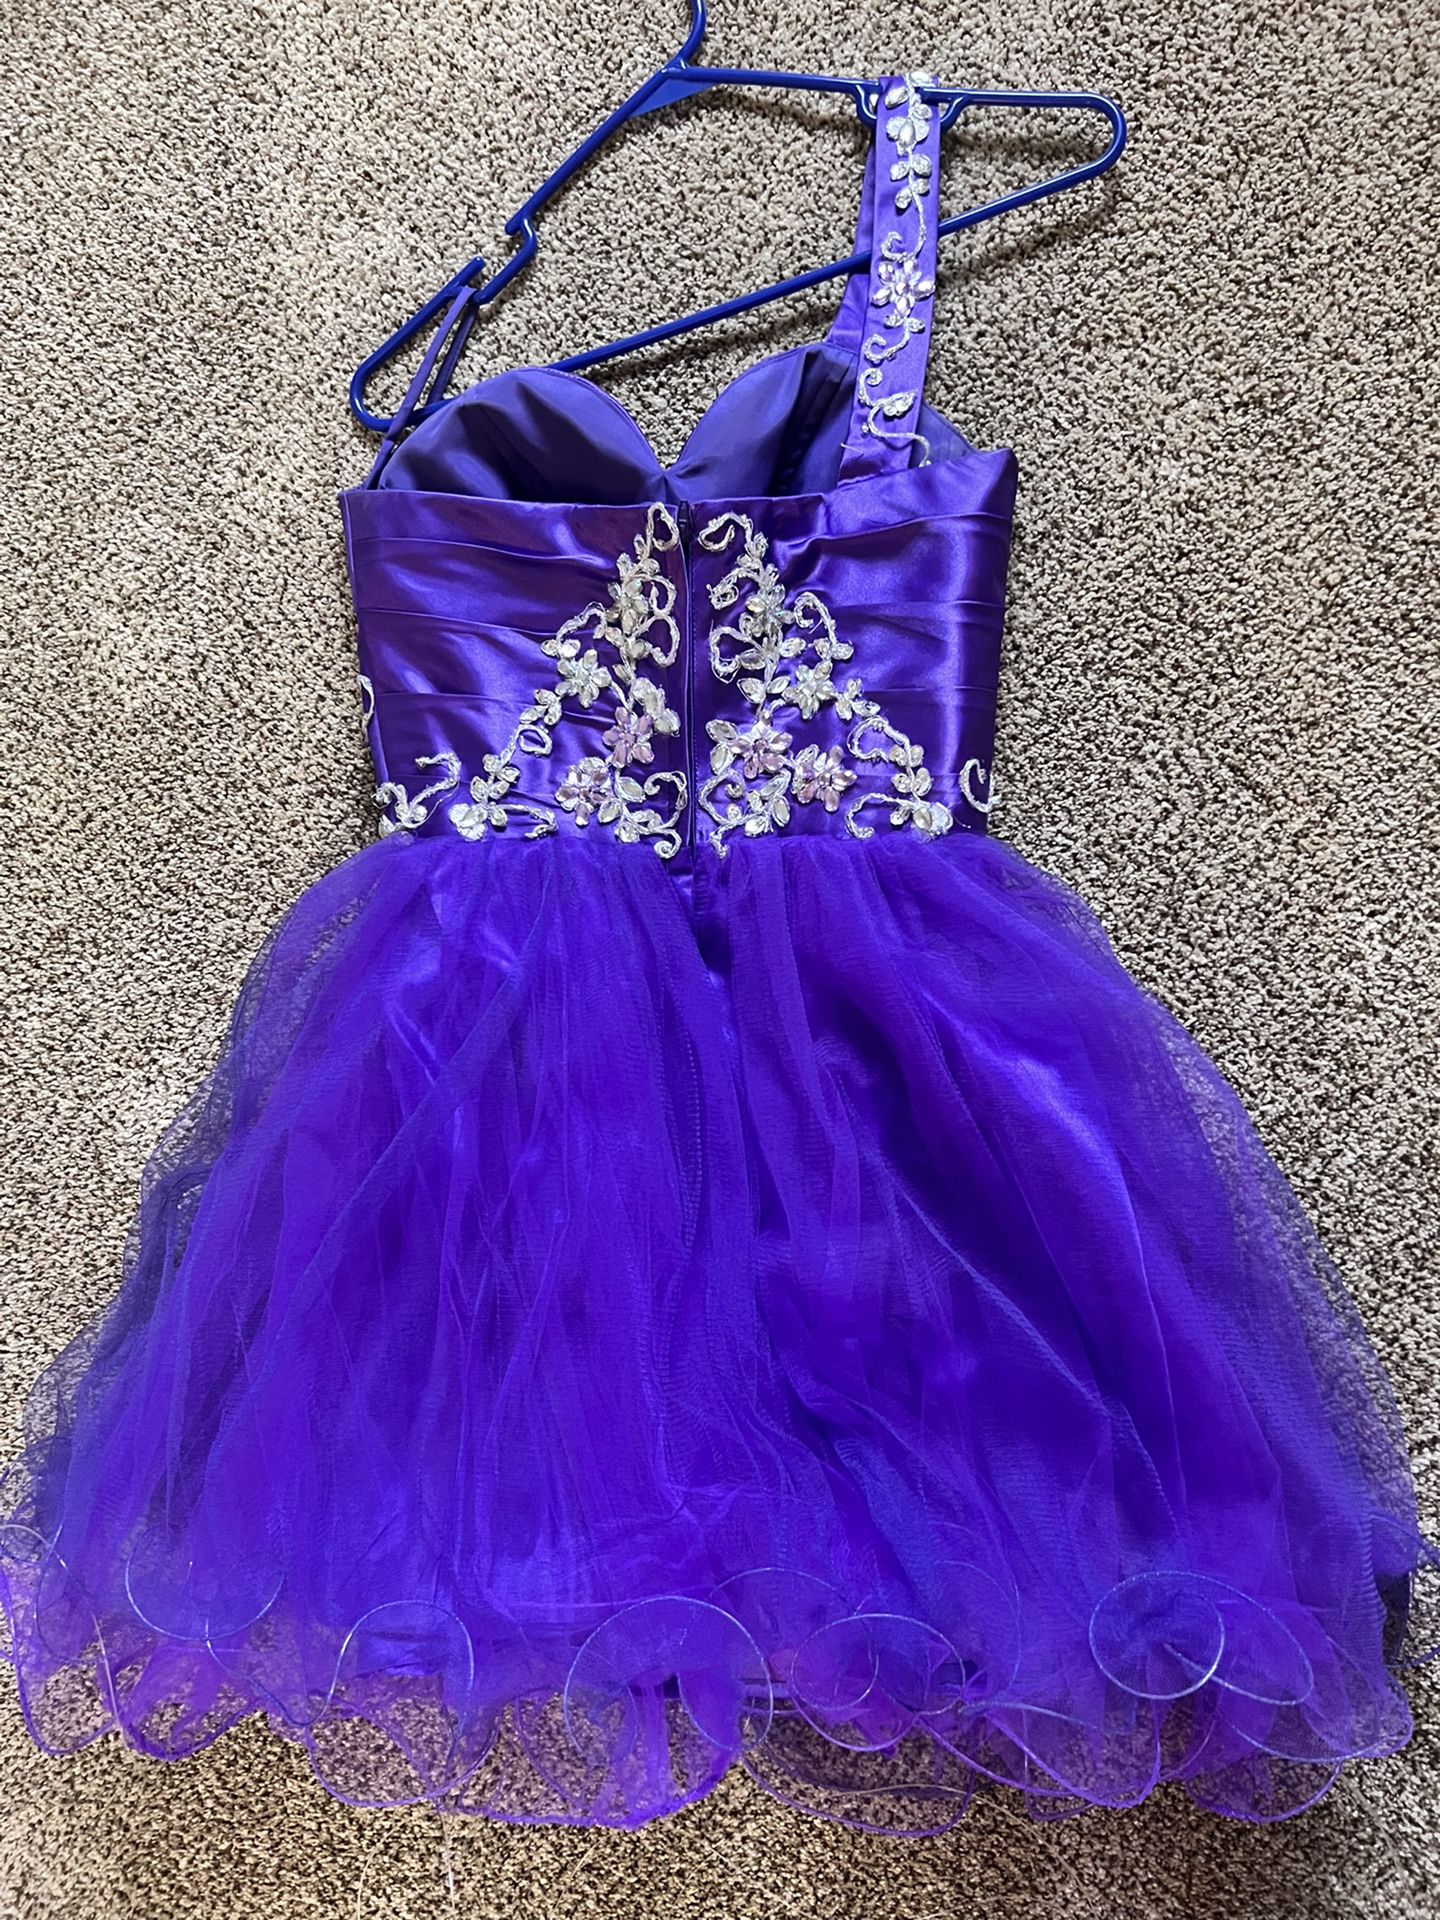 Homecoming/Prom/Party Dress